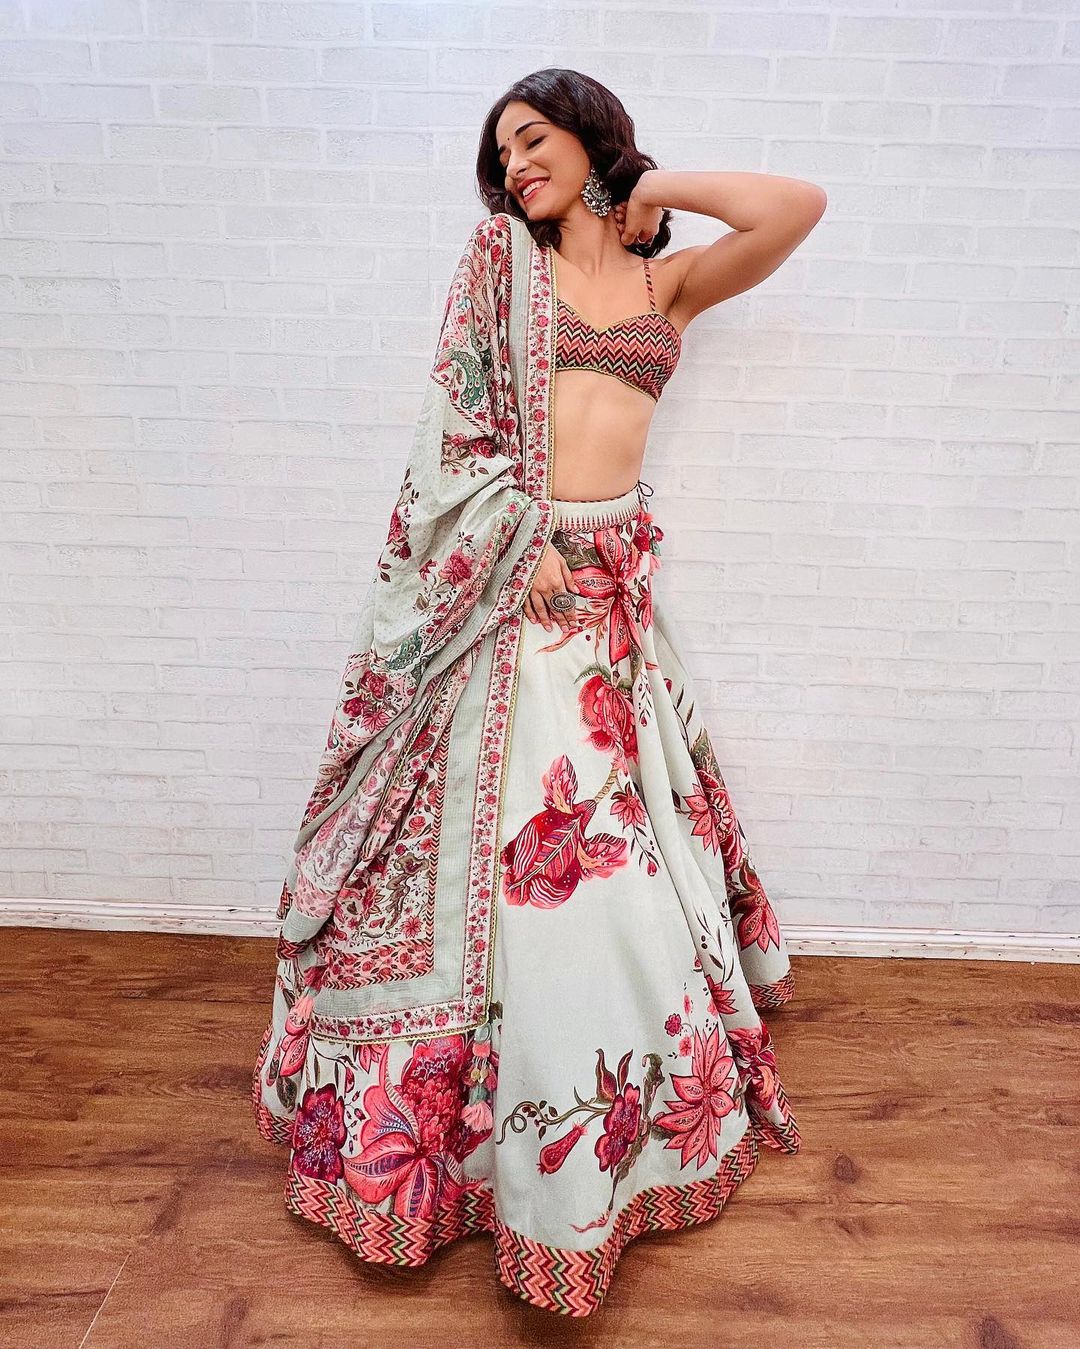 Ananya Panday Makes Jaws Drop In Vibrant Floral Lehenga, Check Out The  Diva's Most Gorgeous Lehenga Looks